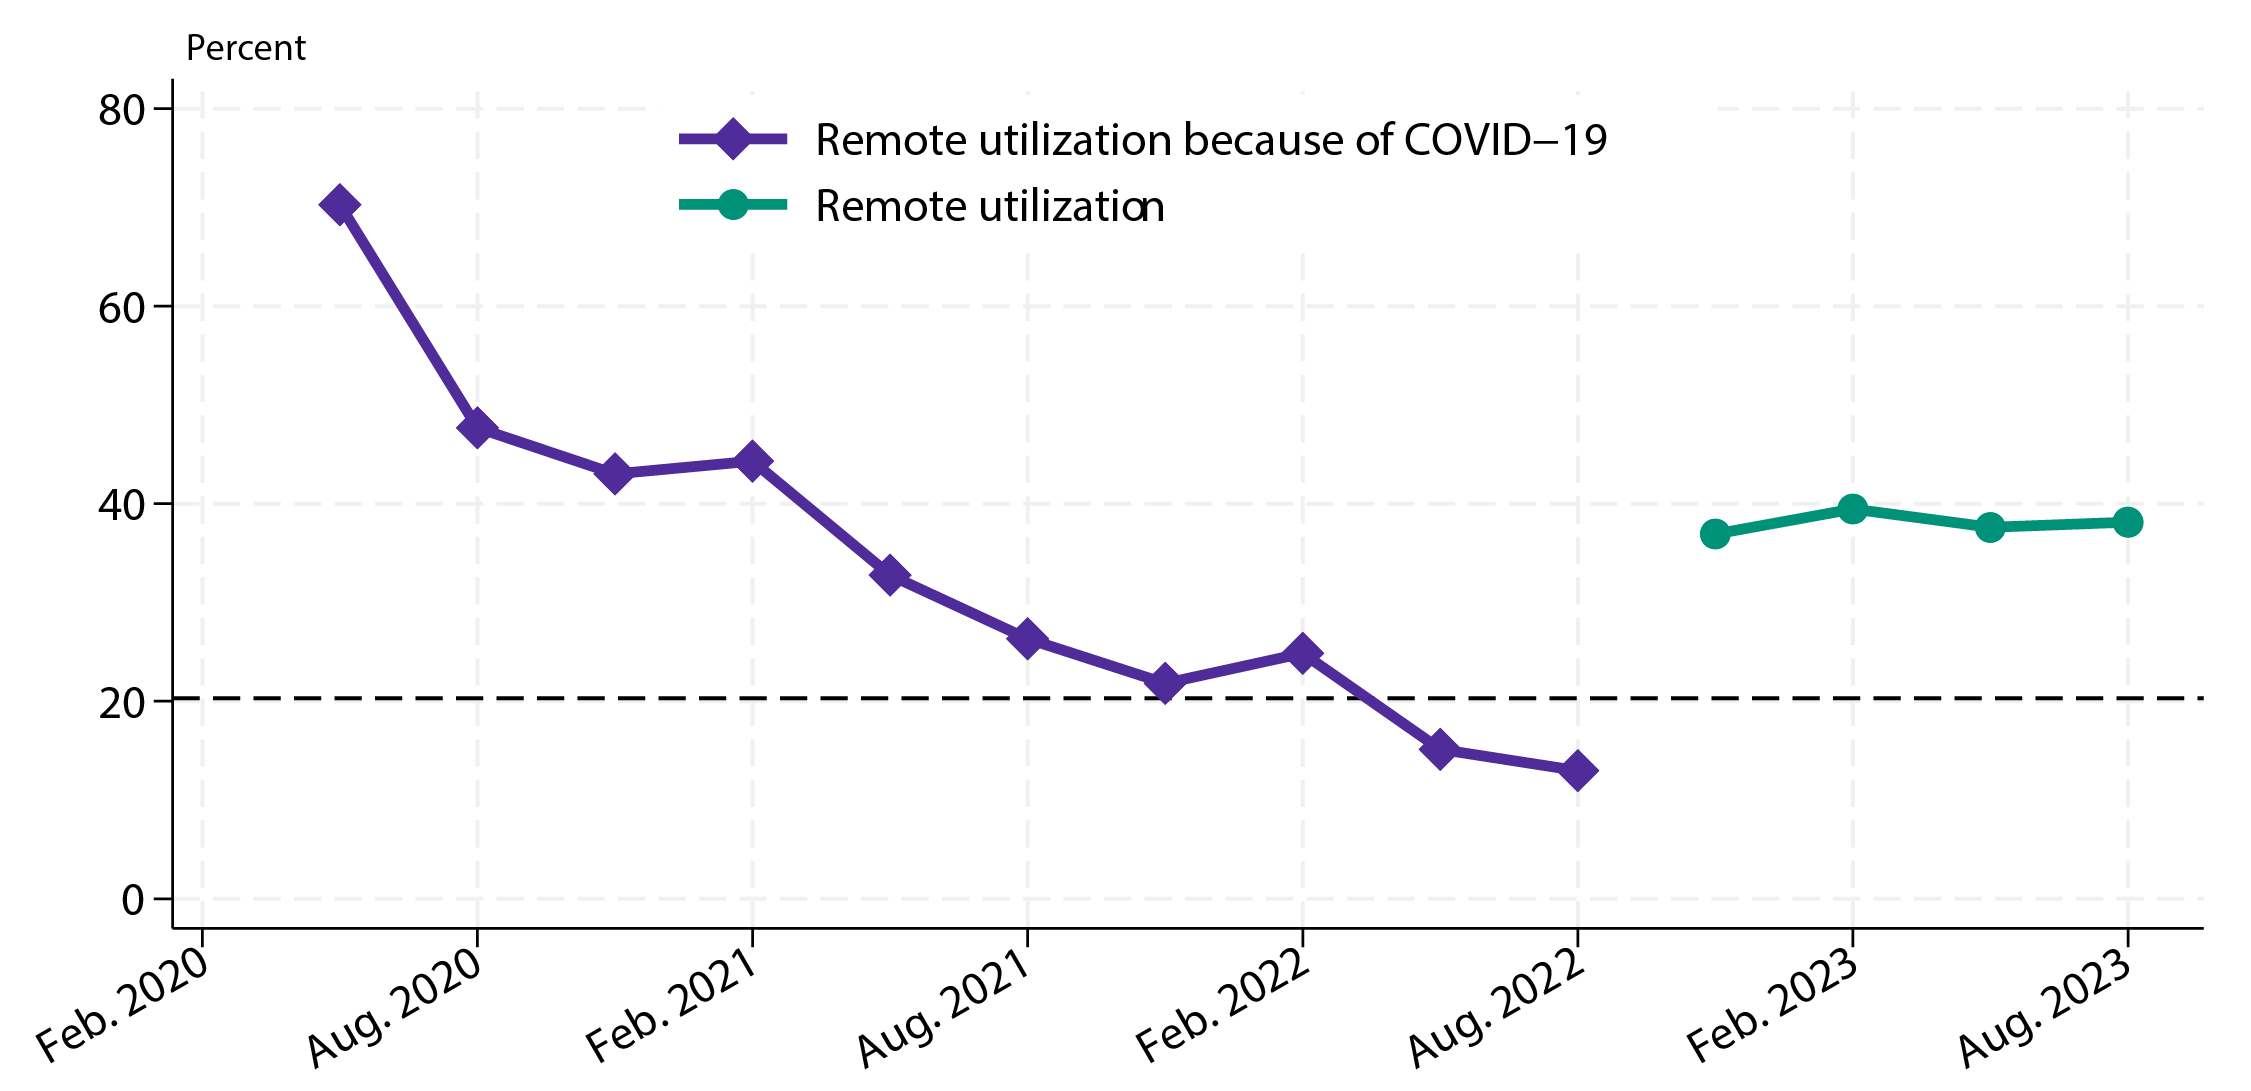 Figure 2. Remote Utilization. See accessible link for data.